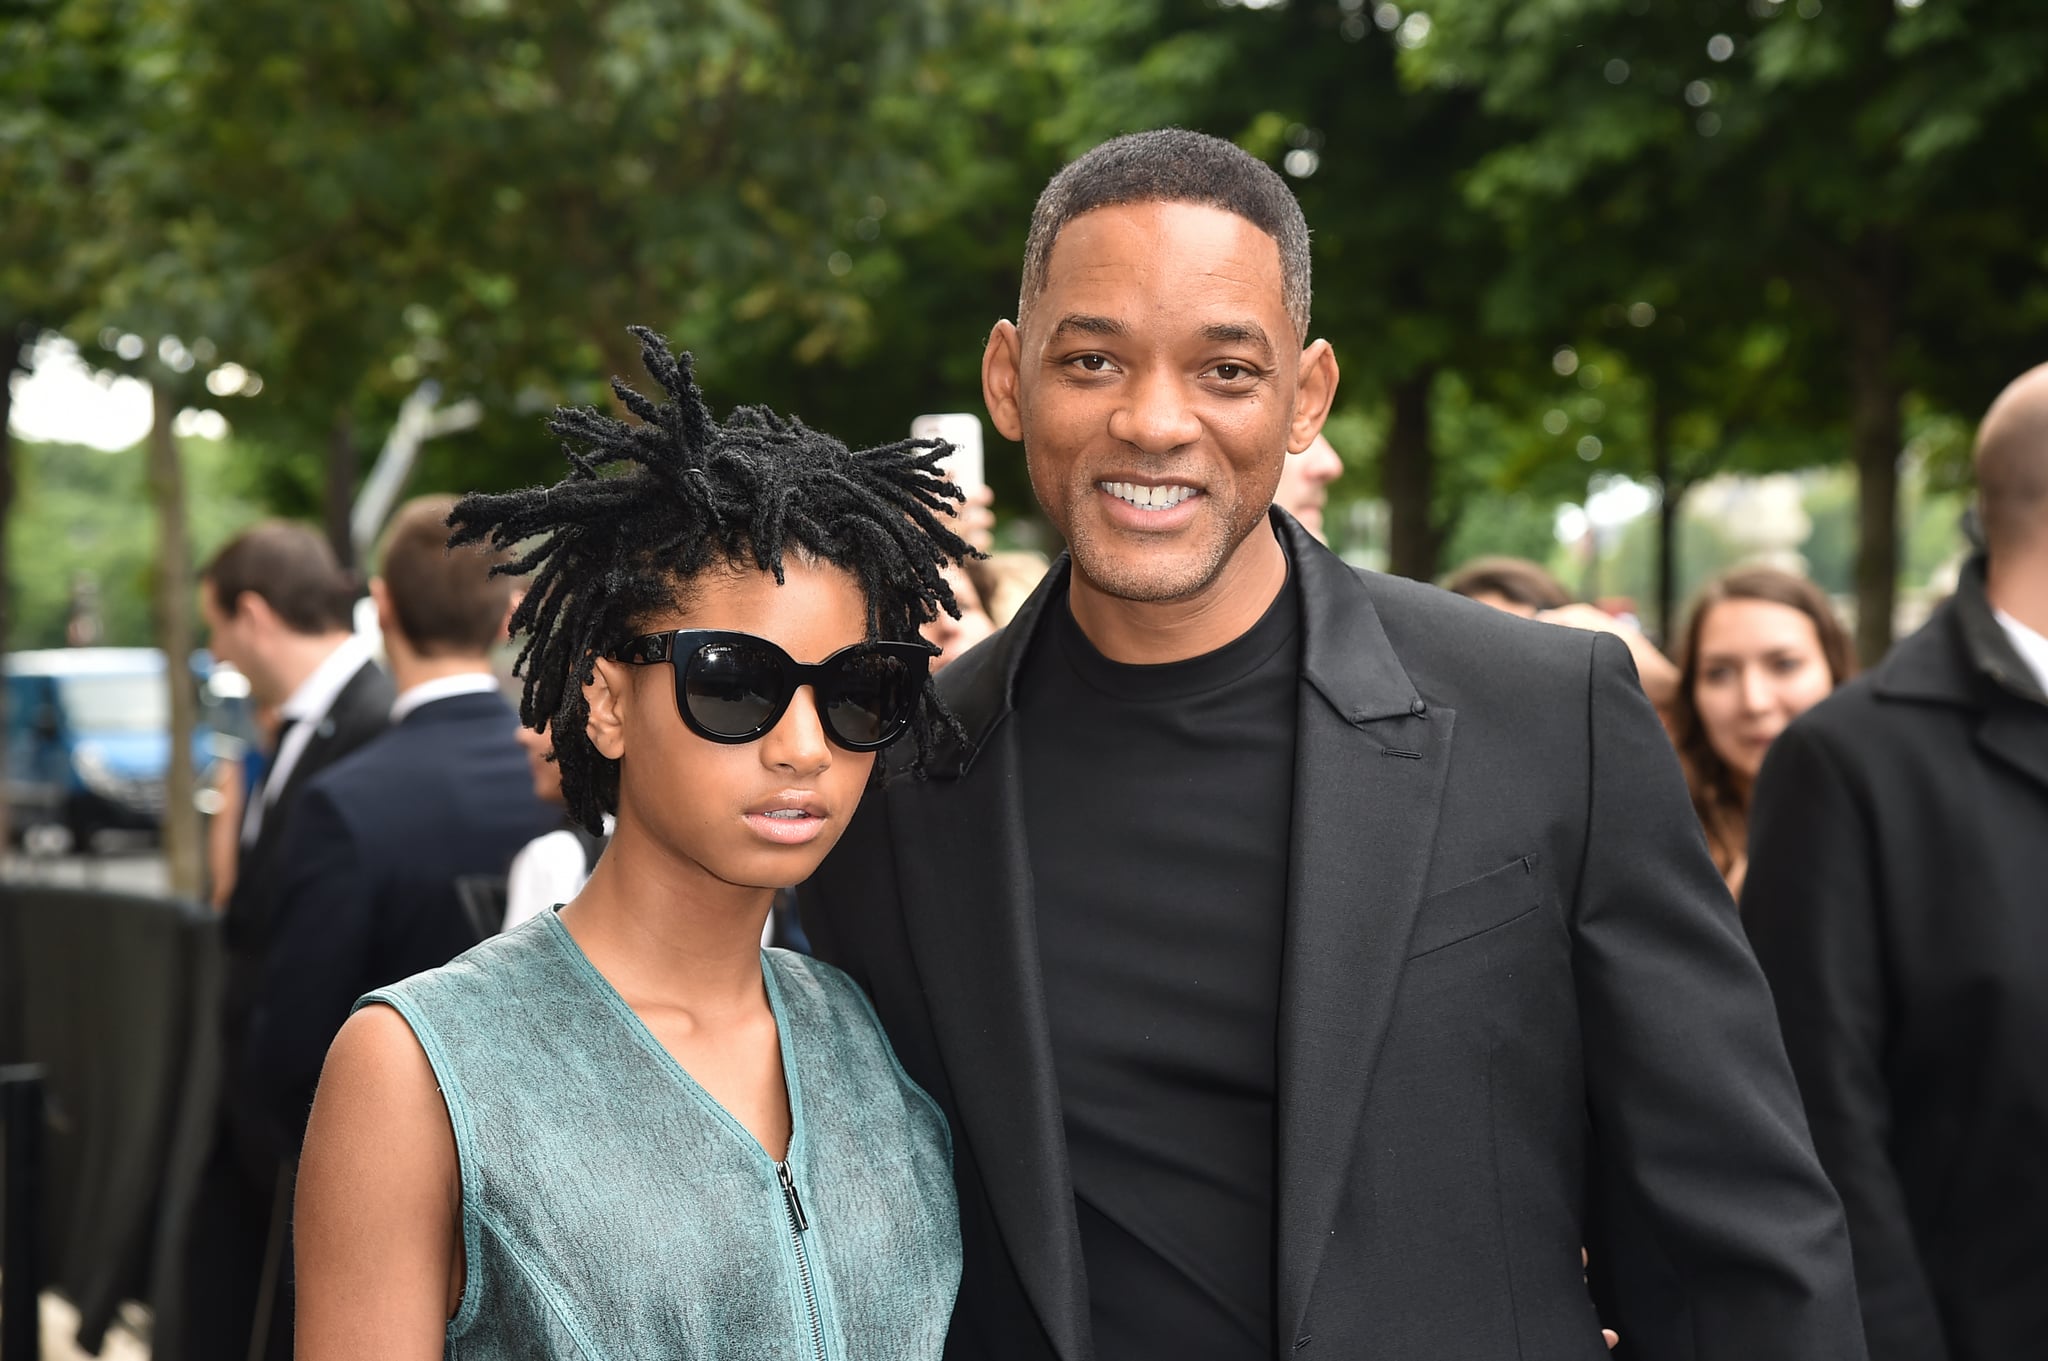 PARIS, FRANCE - JULY 05:  (L-R) Willow Smith and Will Smith are seen arriving at Chanel Fashion show during Paris Fashion Week : Haute Couture F/W 2016-2017 on July 5, 2016 in Paris, France.  (Photo by Jacopo Raule/GC Images)